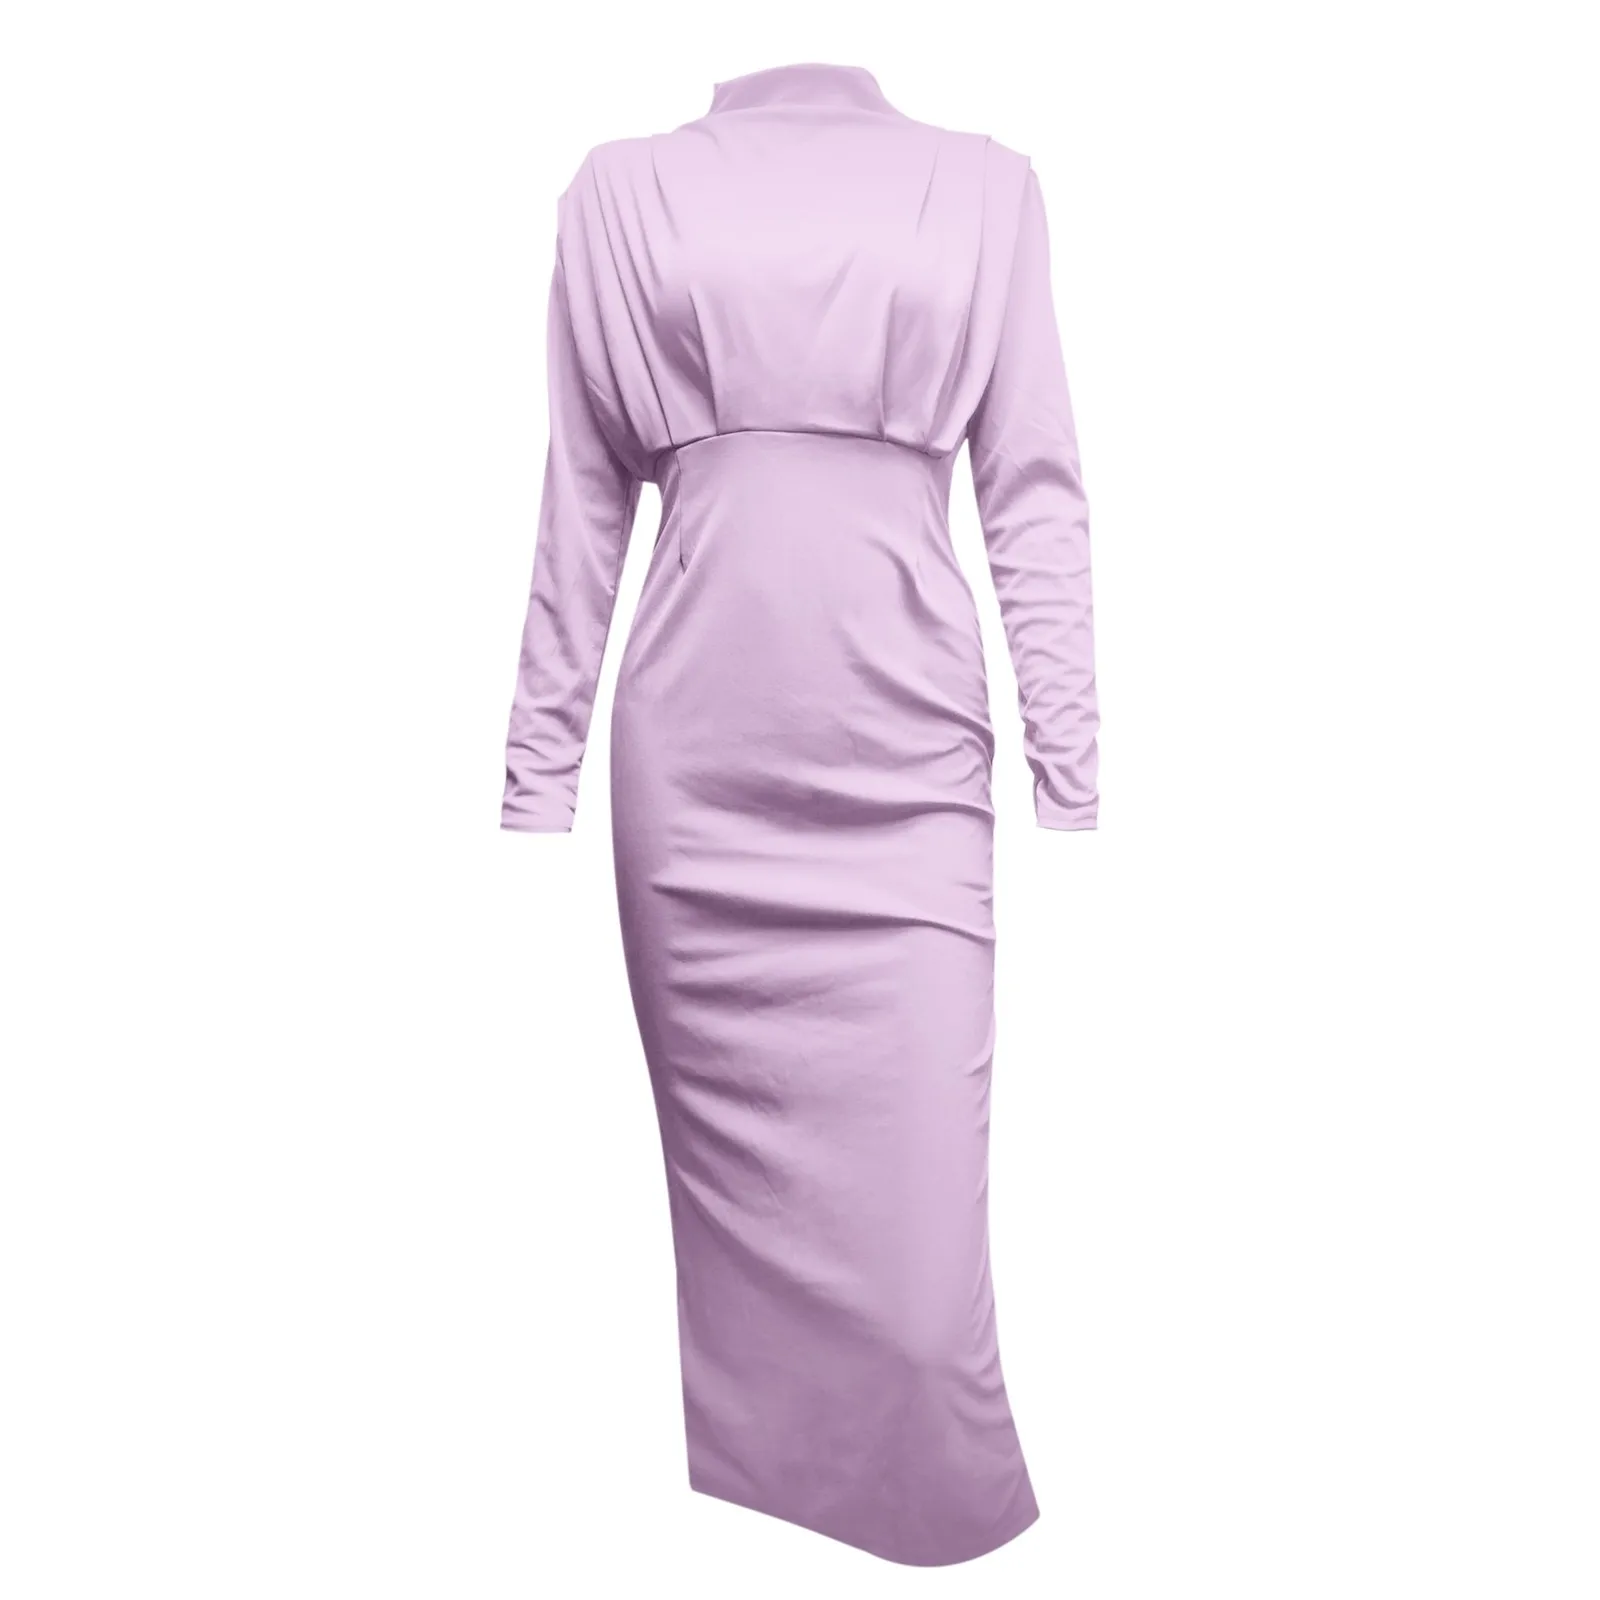 

Women's Spring Elegant Slim Fit Cocktail Dresses Fashion Waisted Pleated Dress Temperament Solid Color Long Sleeve Dresses